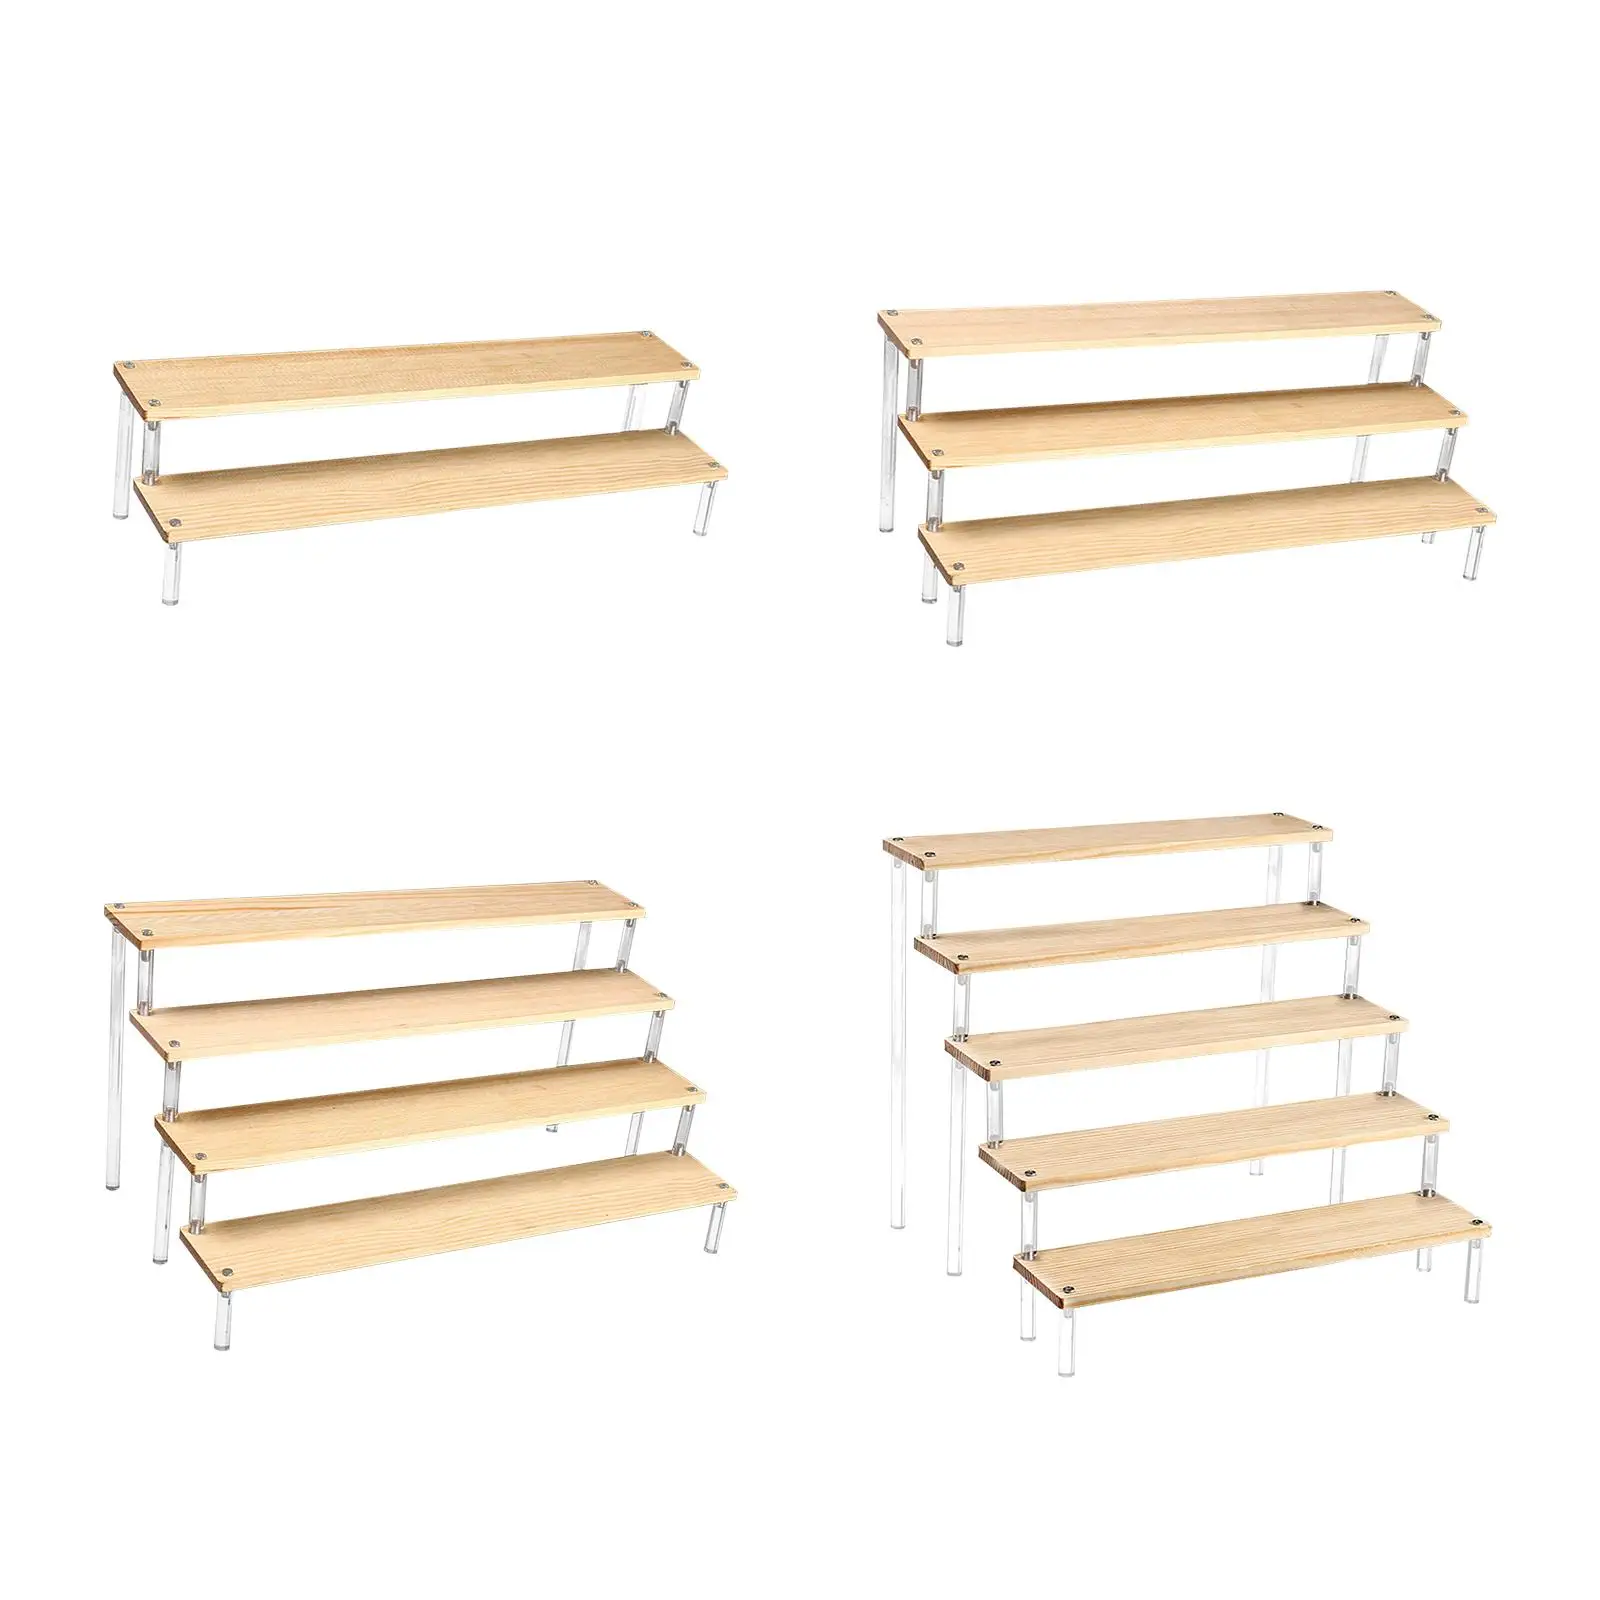 Clear Acrylic Display Riser Shelf Showcase Fixtures Storage Organizer Wood Display Stand for Doll Figure Model Collectibles Toys